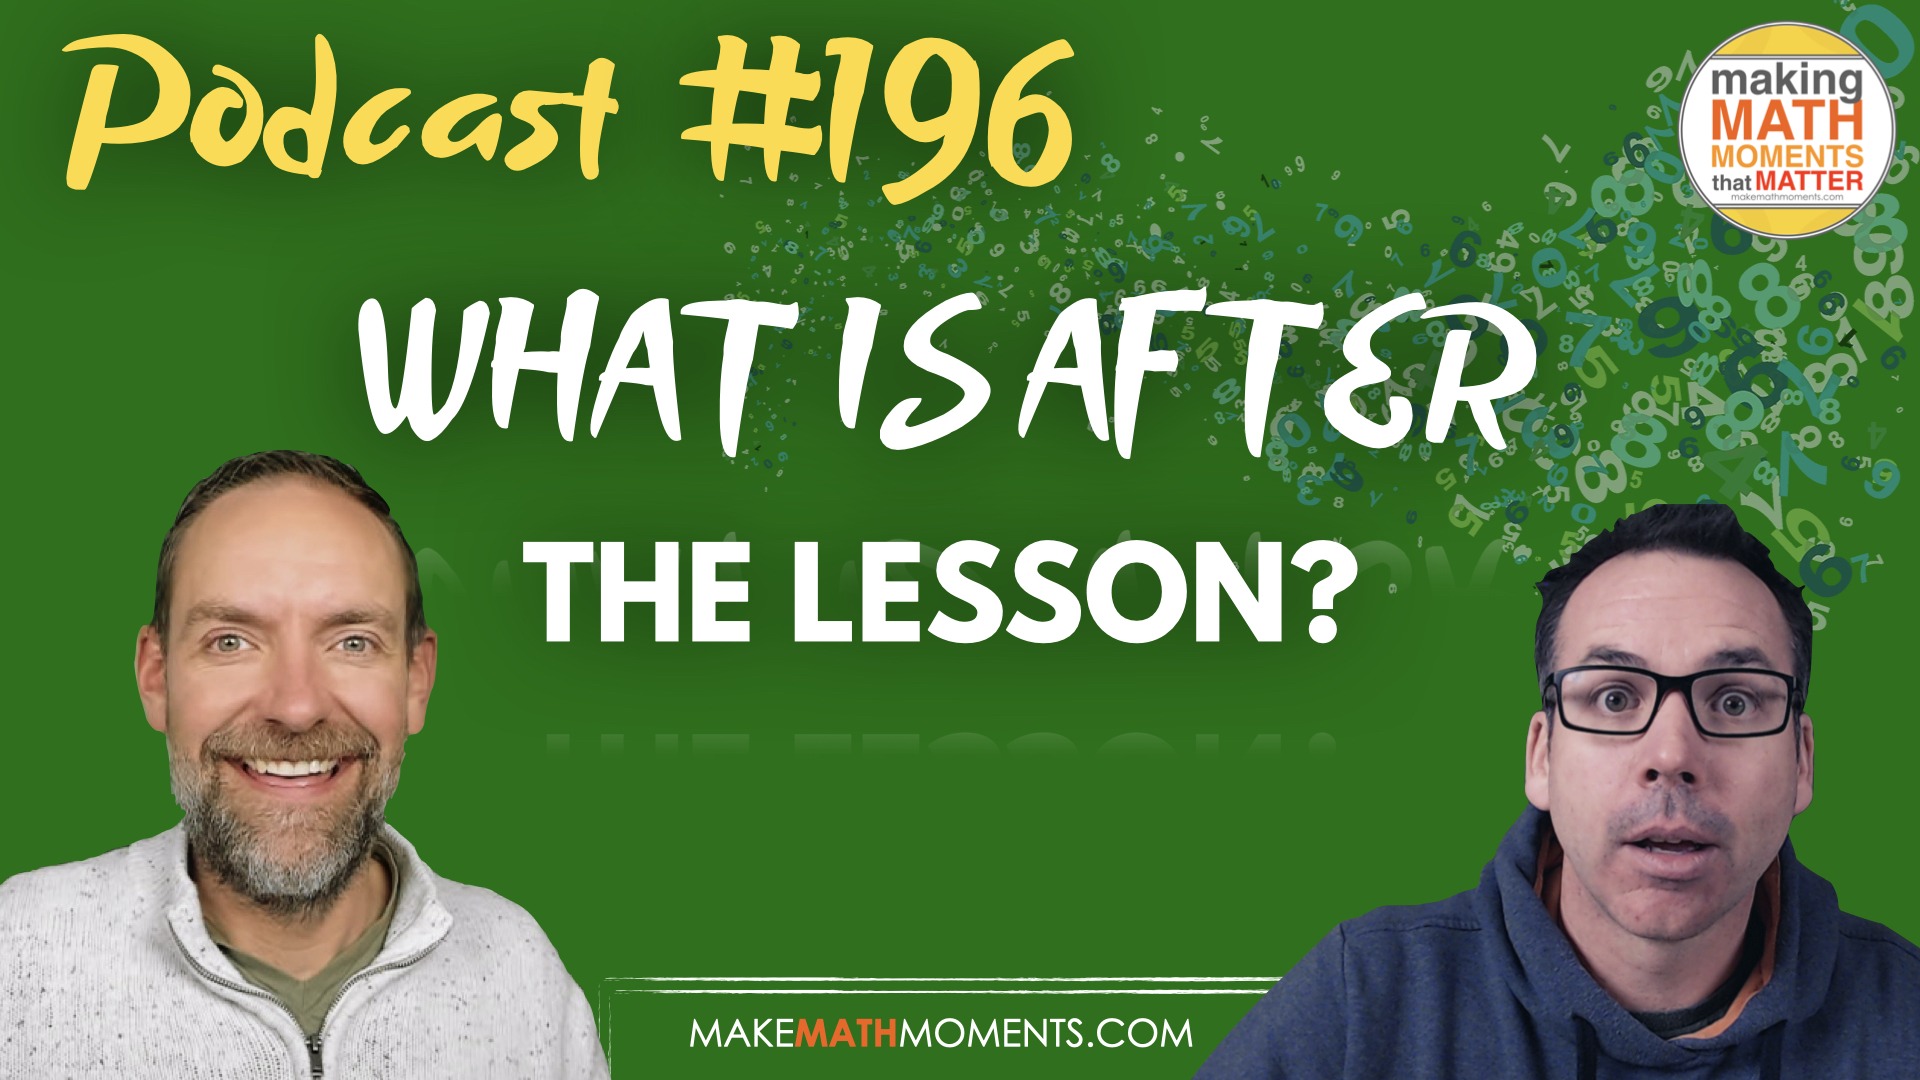 Episode 196 – What’s After The Lesson?